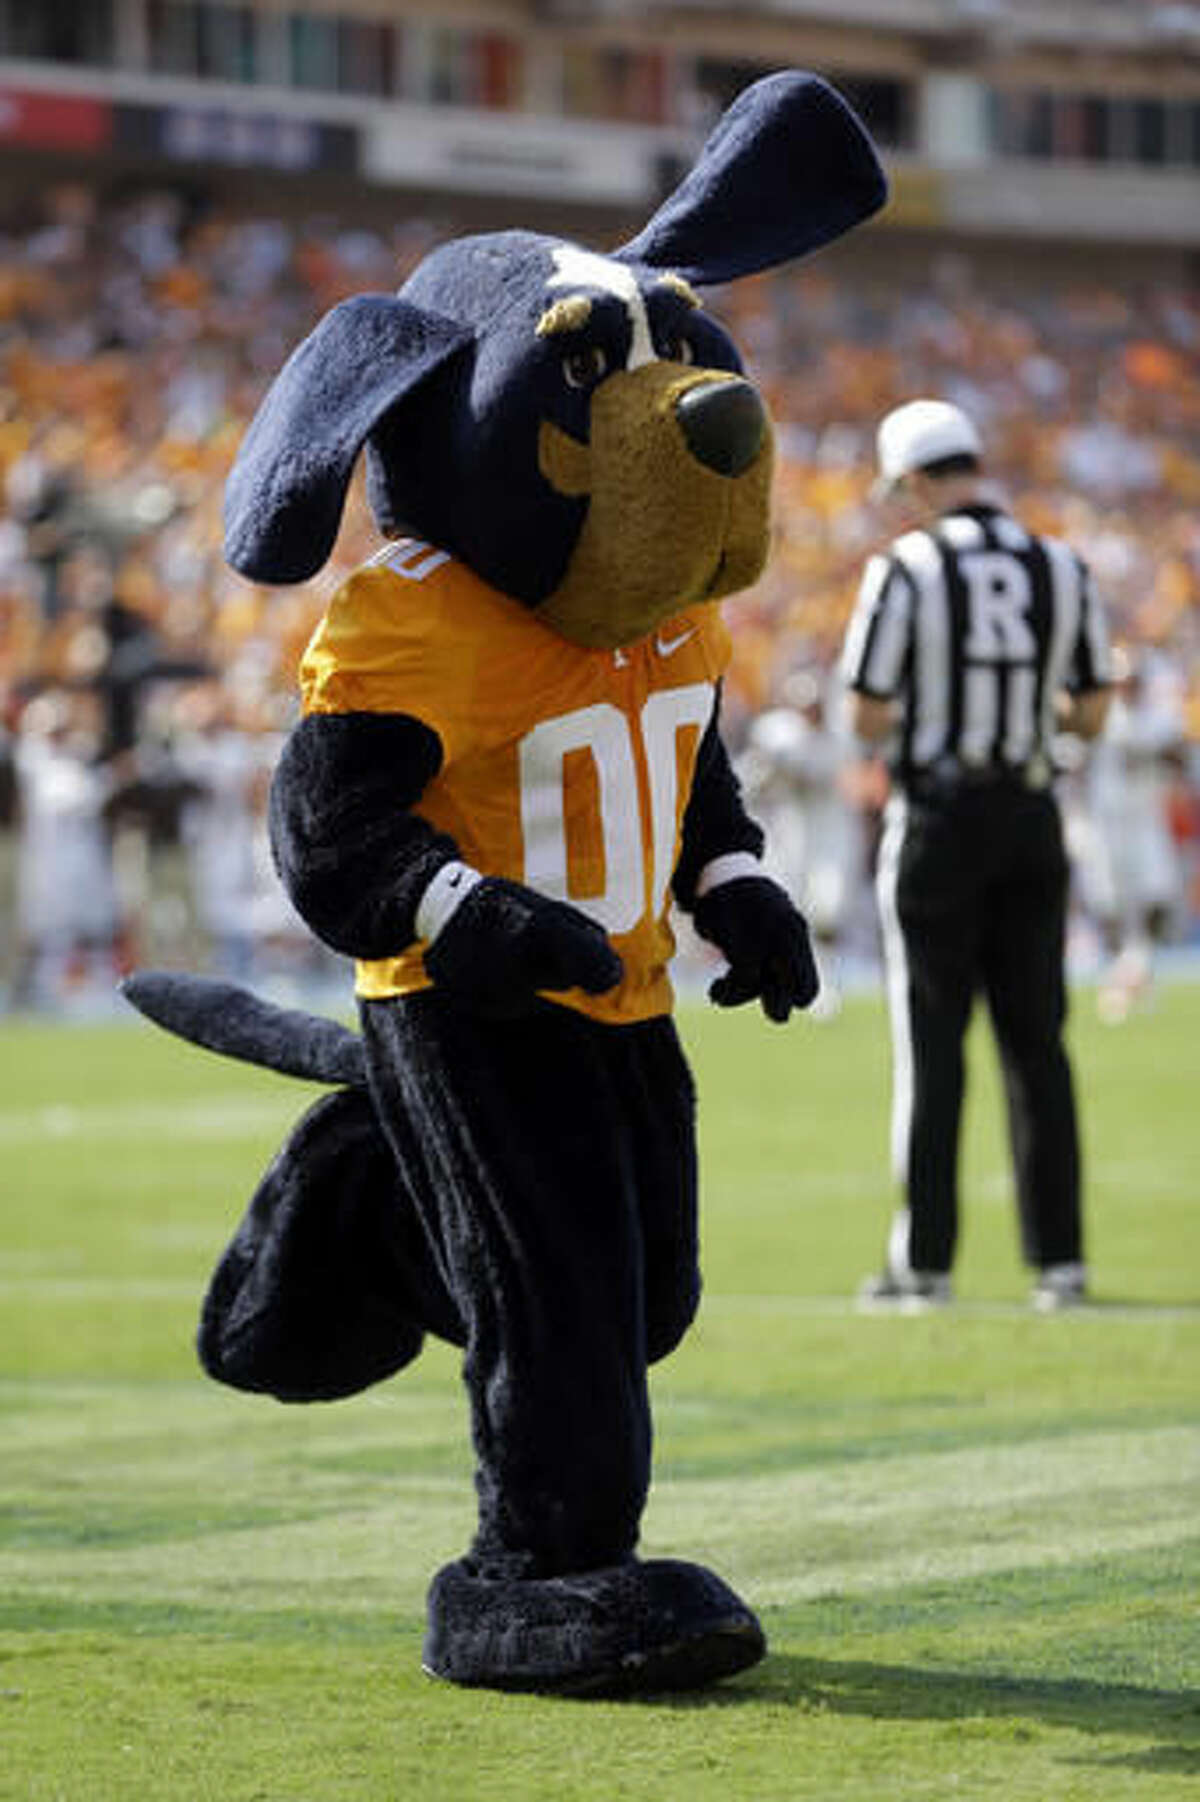 FILE -- In this Sept. 5, 2015, file photo, the Tennessee mascot, Smokey, runs across the field in the first half of an NCAA college football game between Tennessee and Bowling Green in Nashville, Tenn. Smokey is among the 10 pro and seven collegiate mascots that have been inducted into the Mascot Hall of Fame will be built in Whiting, Ind. (AP Photo/Mark Humphrey, File)